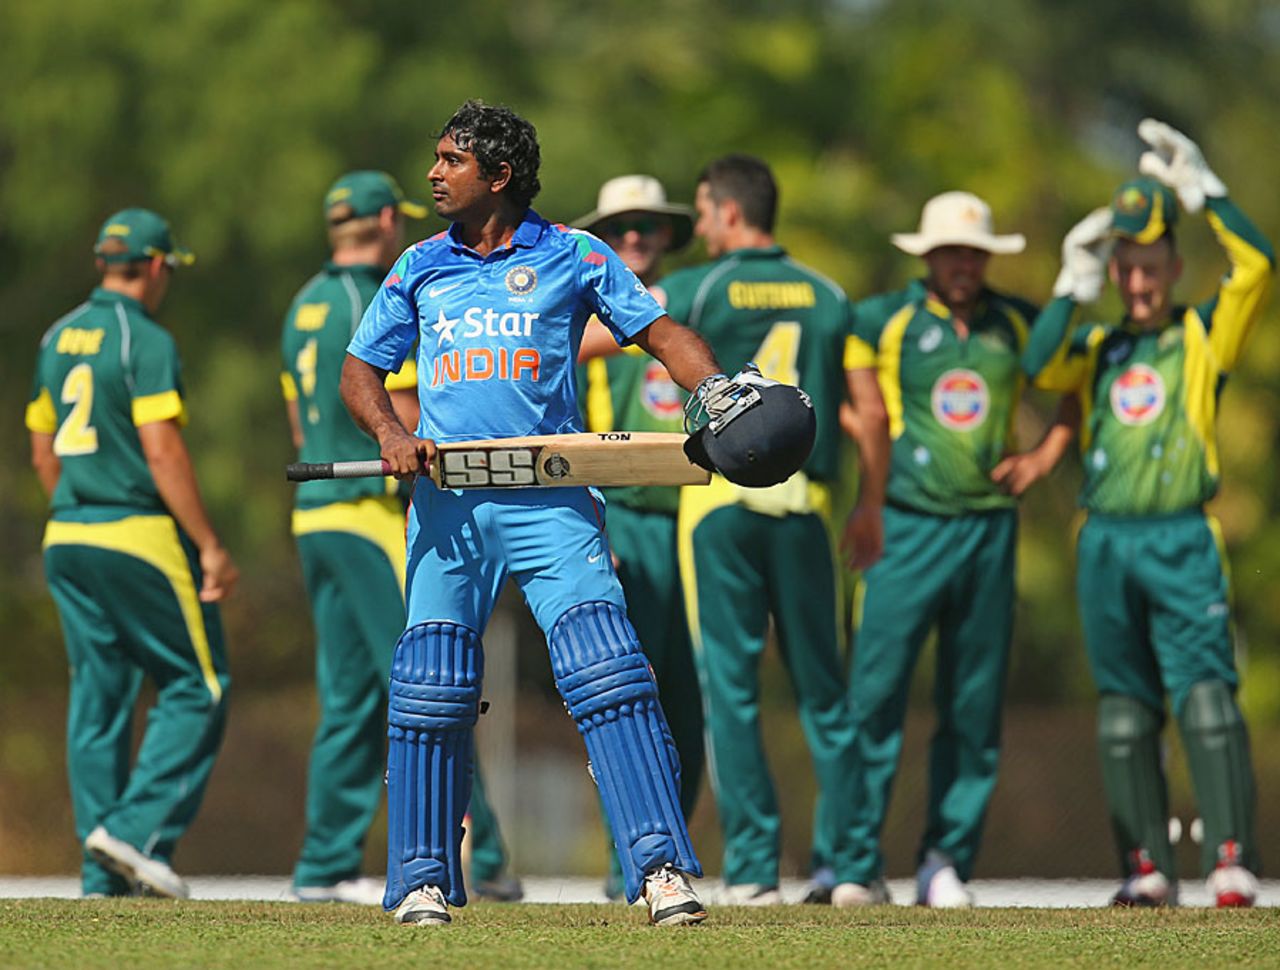 Ambati Rayudu was unhappy after being given out lbw, Australia A v India A, Quadrangular A-Team One-day series, final, Darwin, August 2, 2014